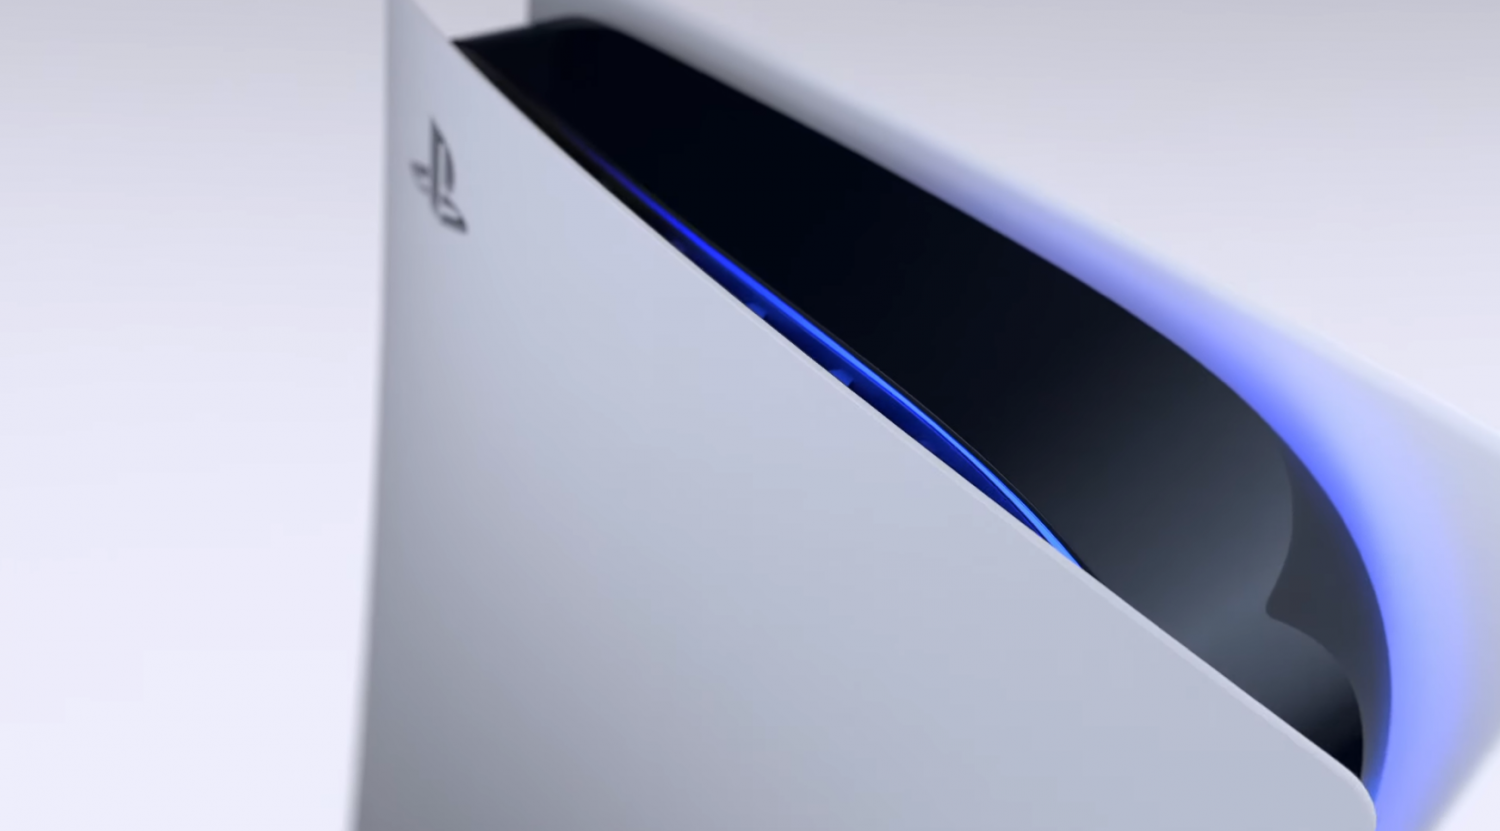 selvmord nedbrydes dosis PlayStation 5 price: All the evidence that PS5 may cost $499